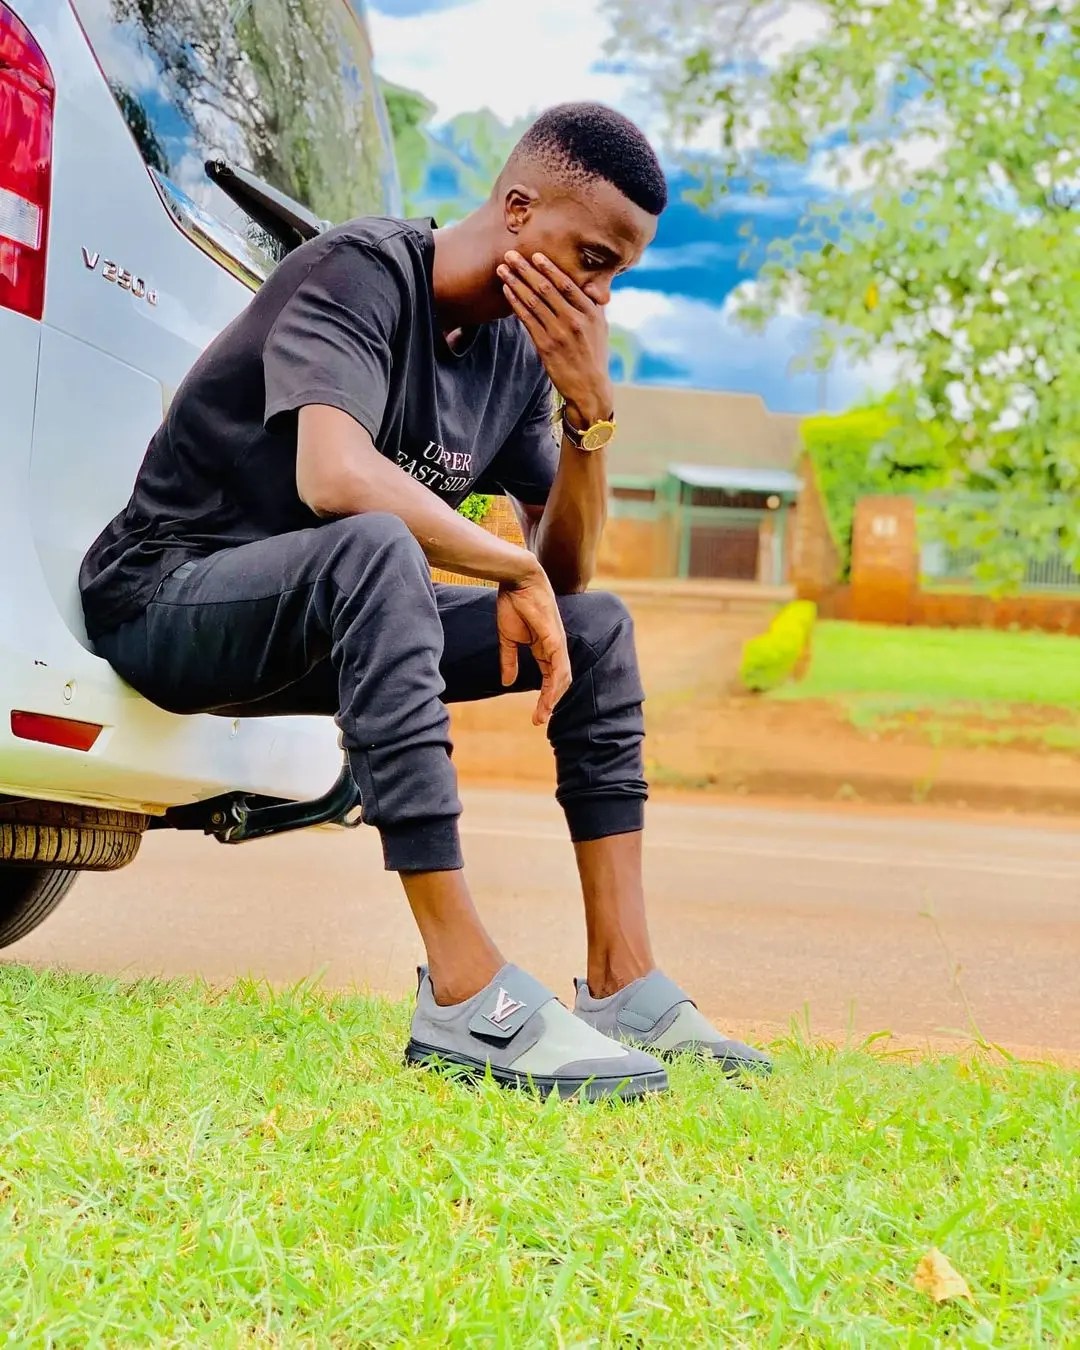 King Monada in hot soup after COVID-19 comments